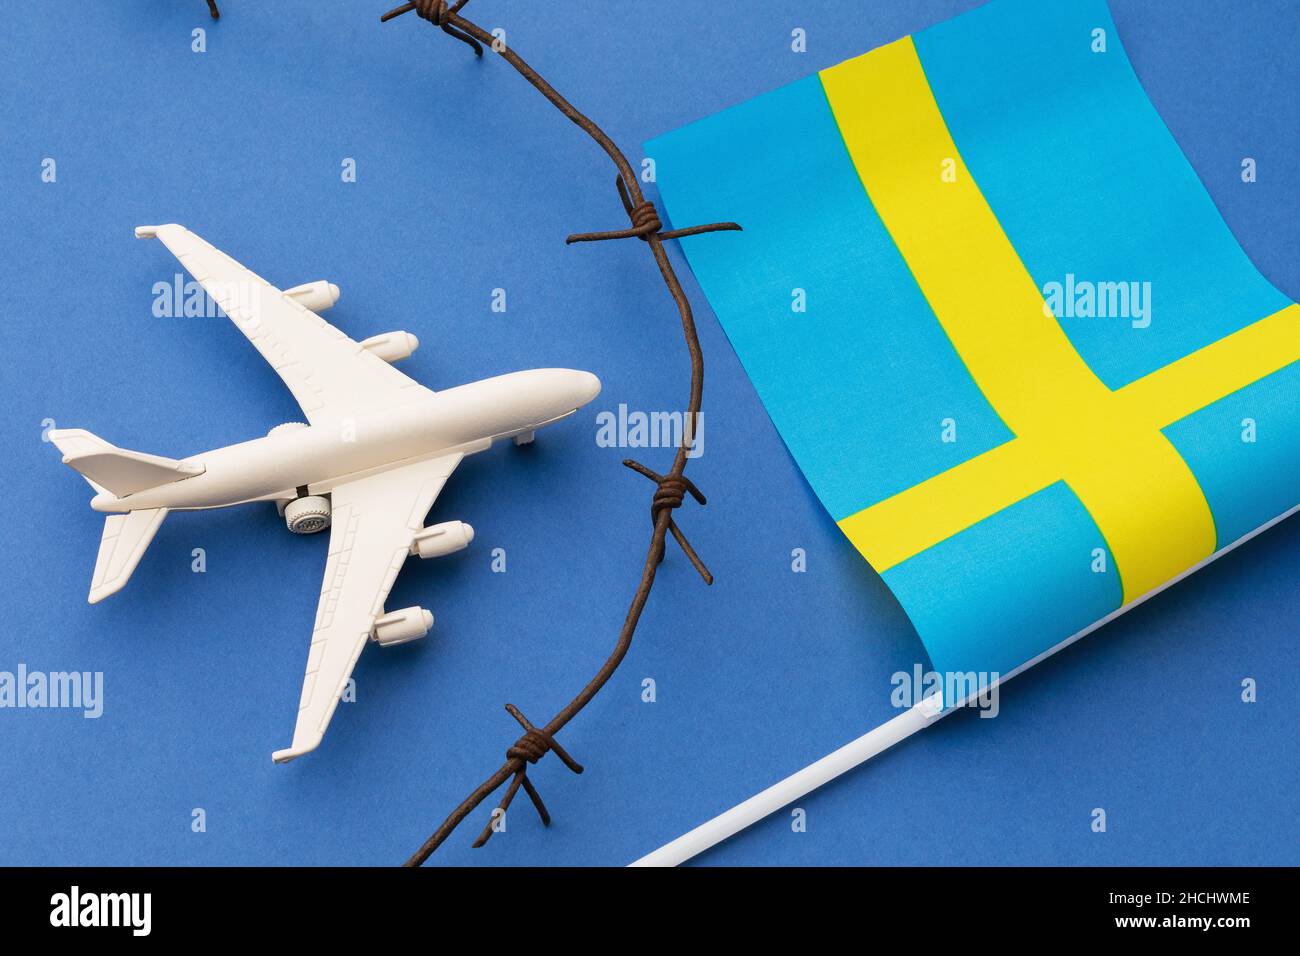 Toy plane, Swedish flag and barbed wire on blue background, Sweden air border violation concept Stock Photo